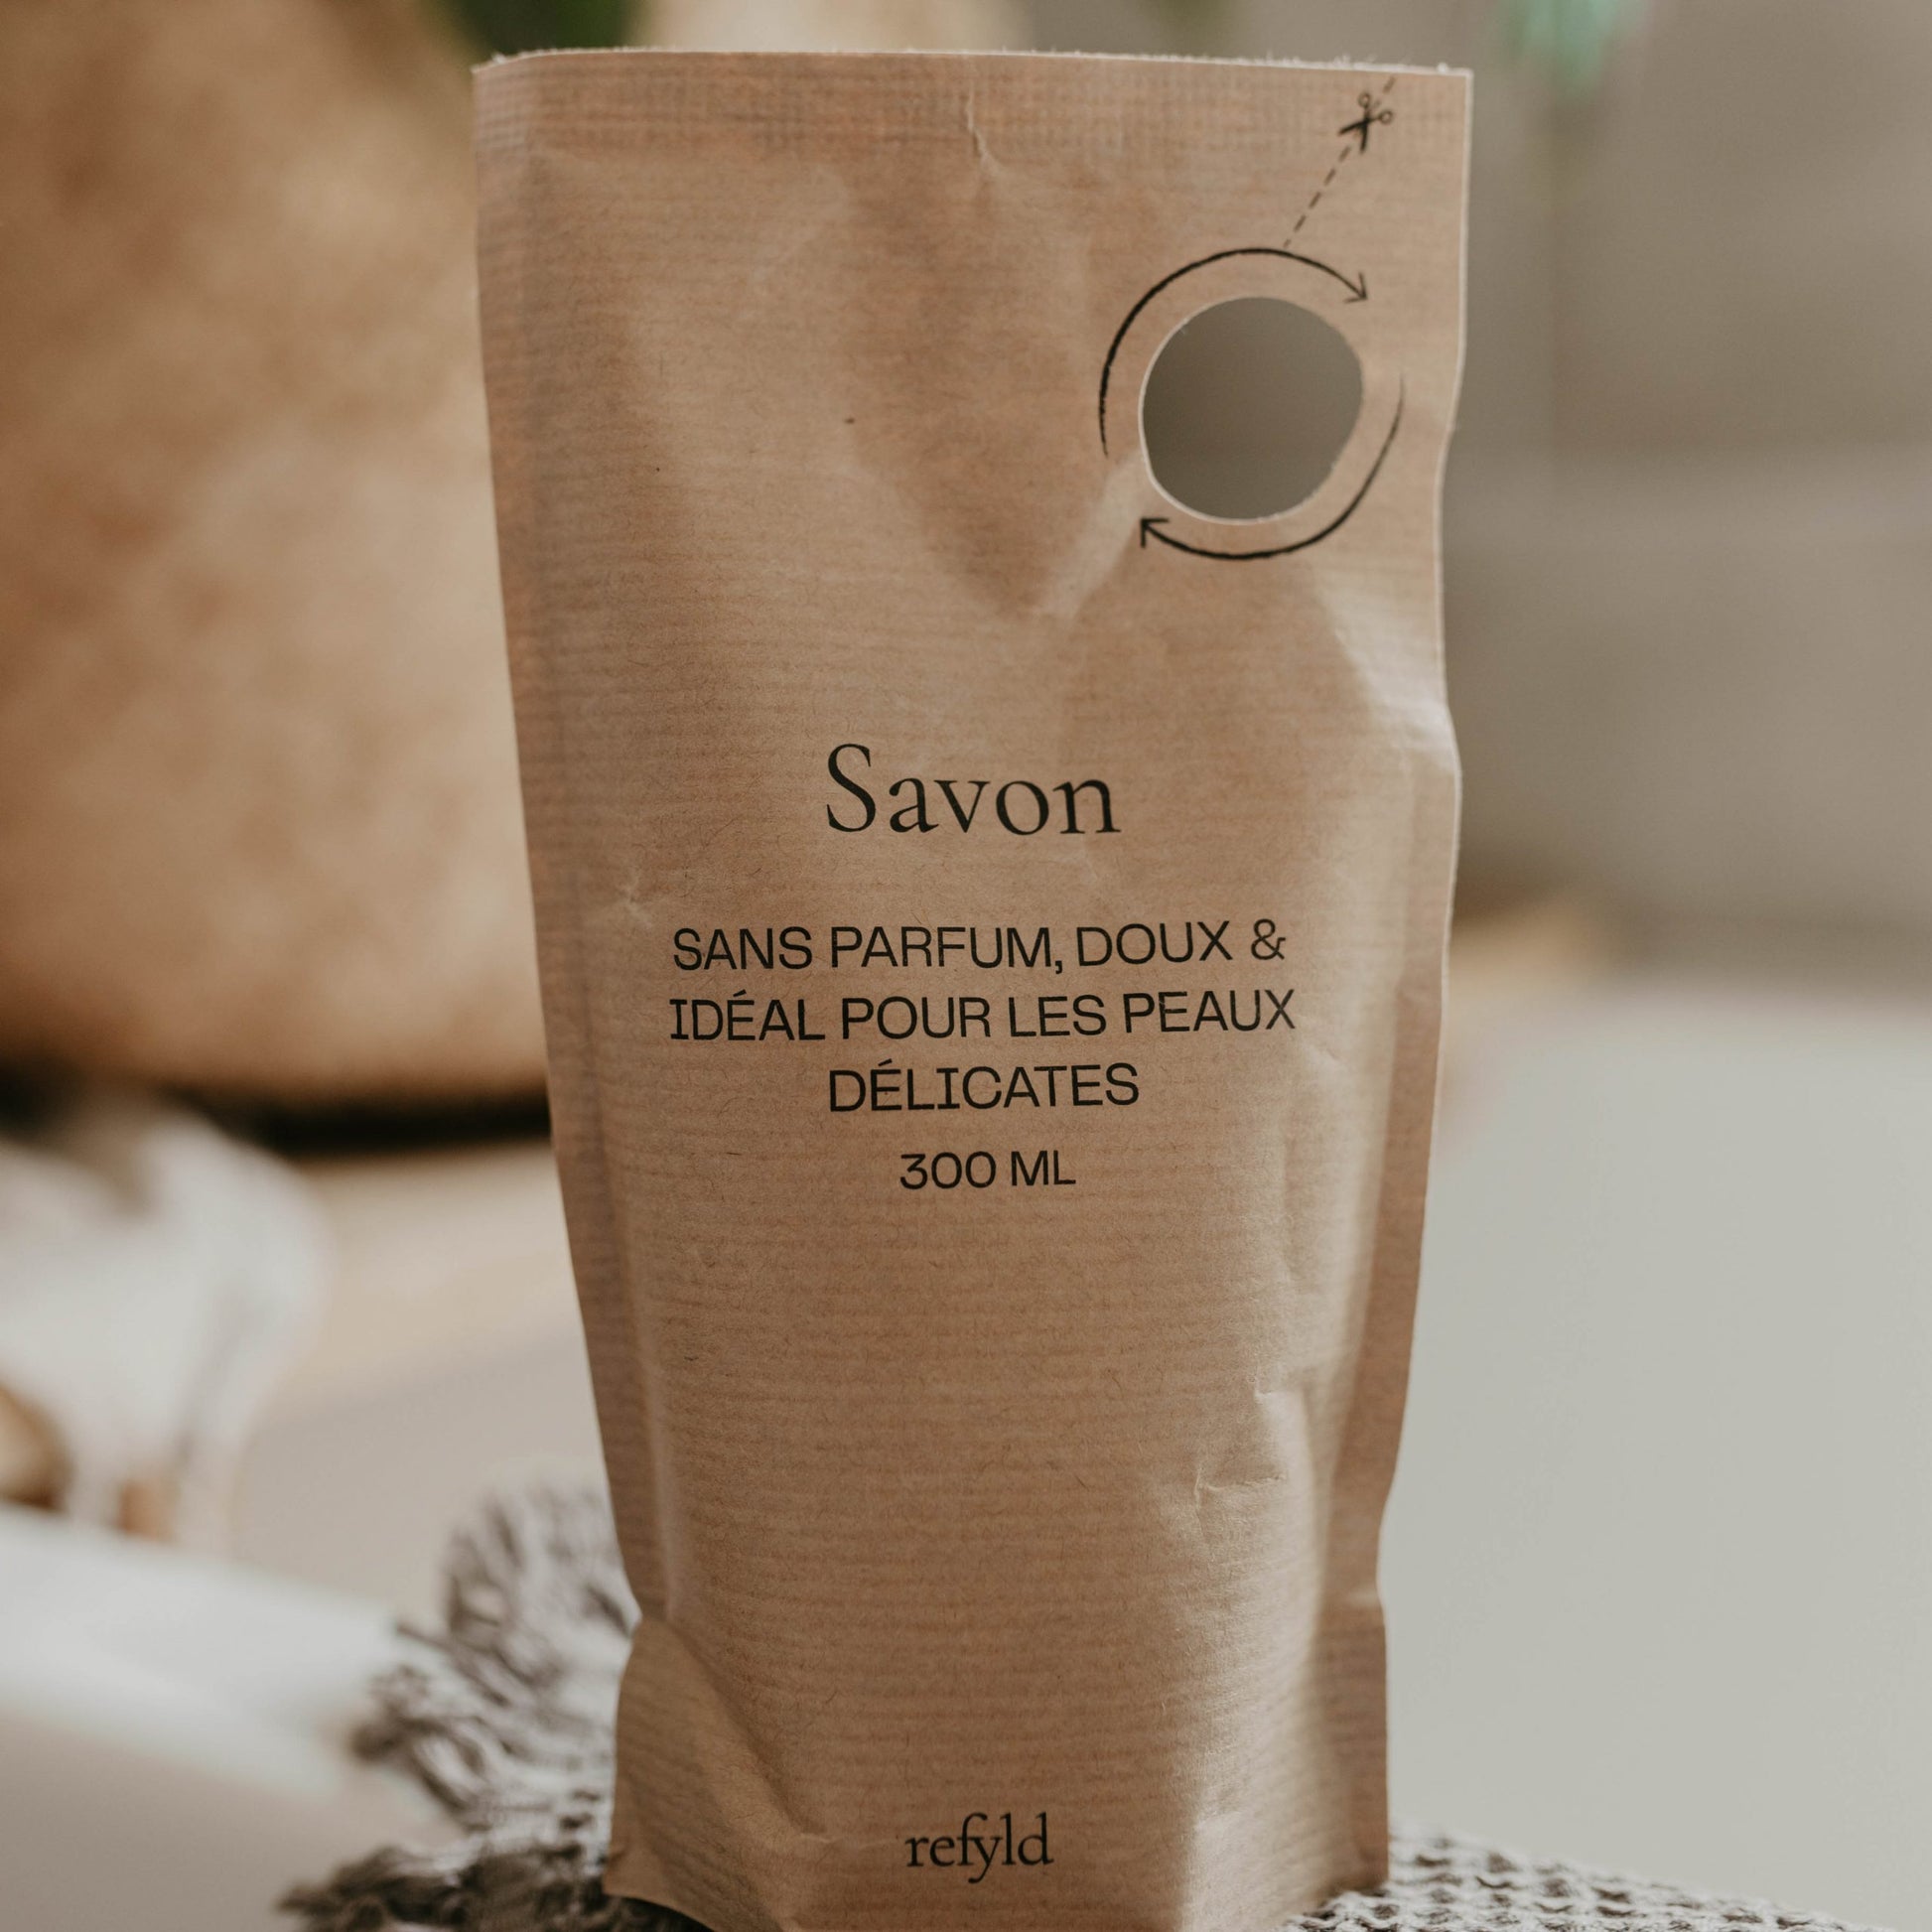 Savon by Refyld - Simplethings